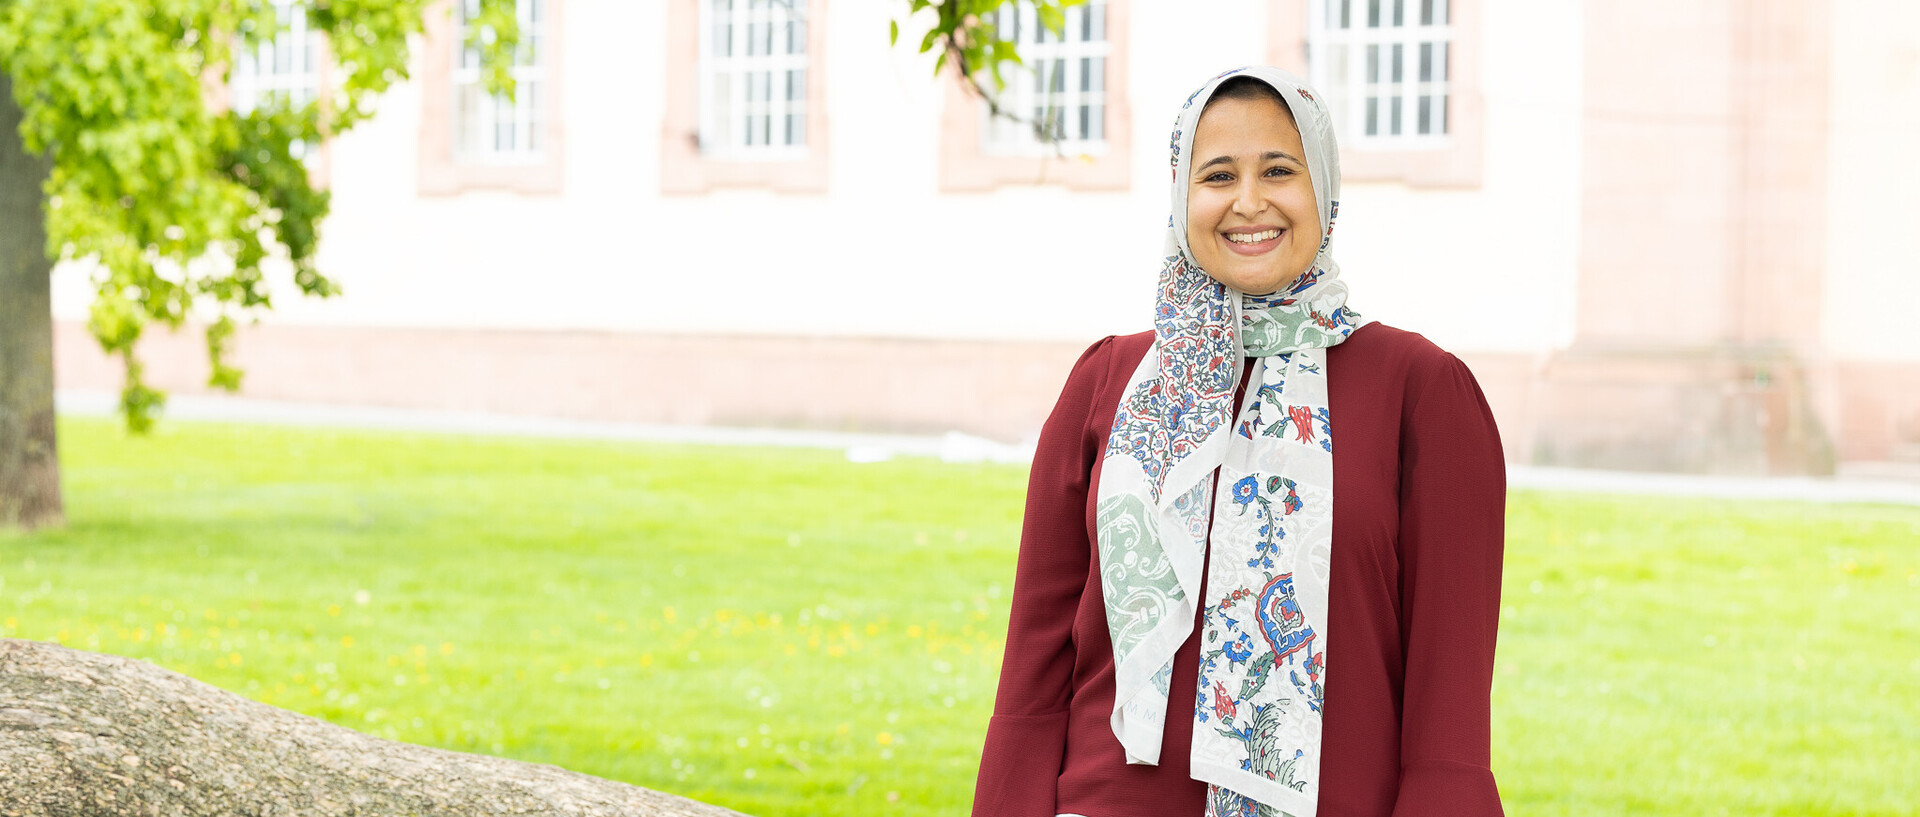 Alaa Elfawal stands smiling in front of a tree. She is wearing a colorful headscarf, a red blouse, and white trousers. The Schloss is in the background.